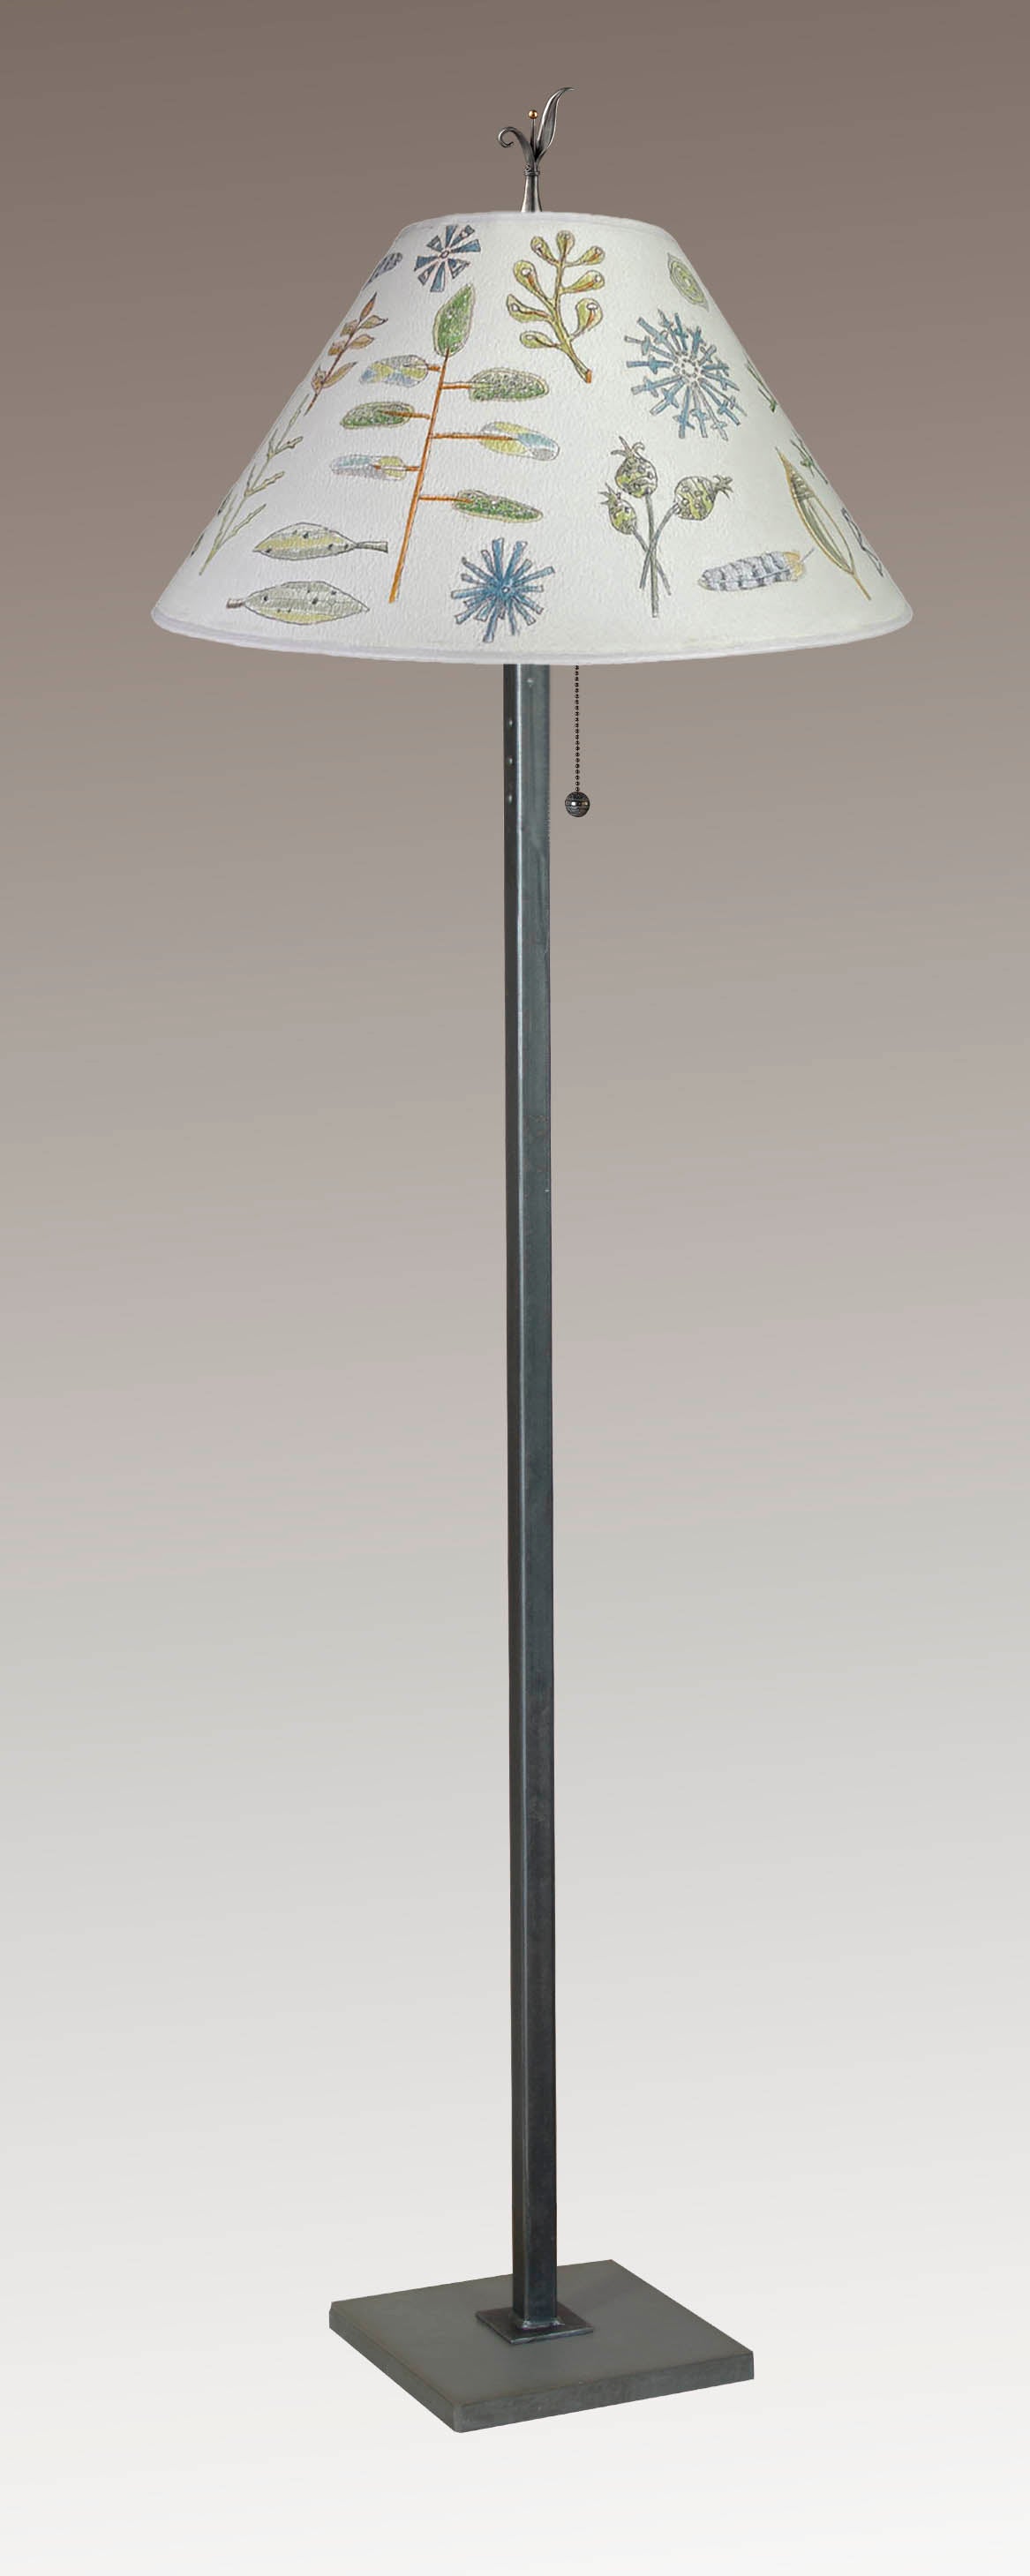 Janna Ugone & Co Floor Lamp Steel Floor Lamp with Large Conical Shade in Field Chart